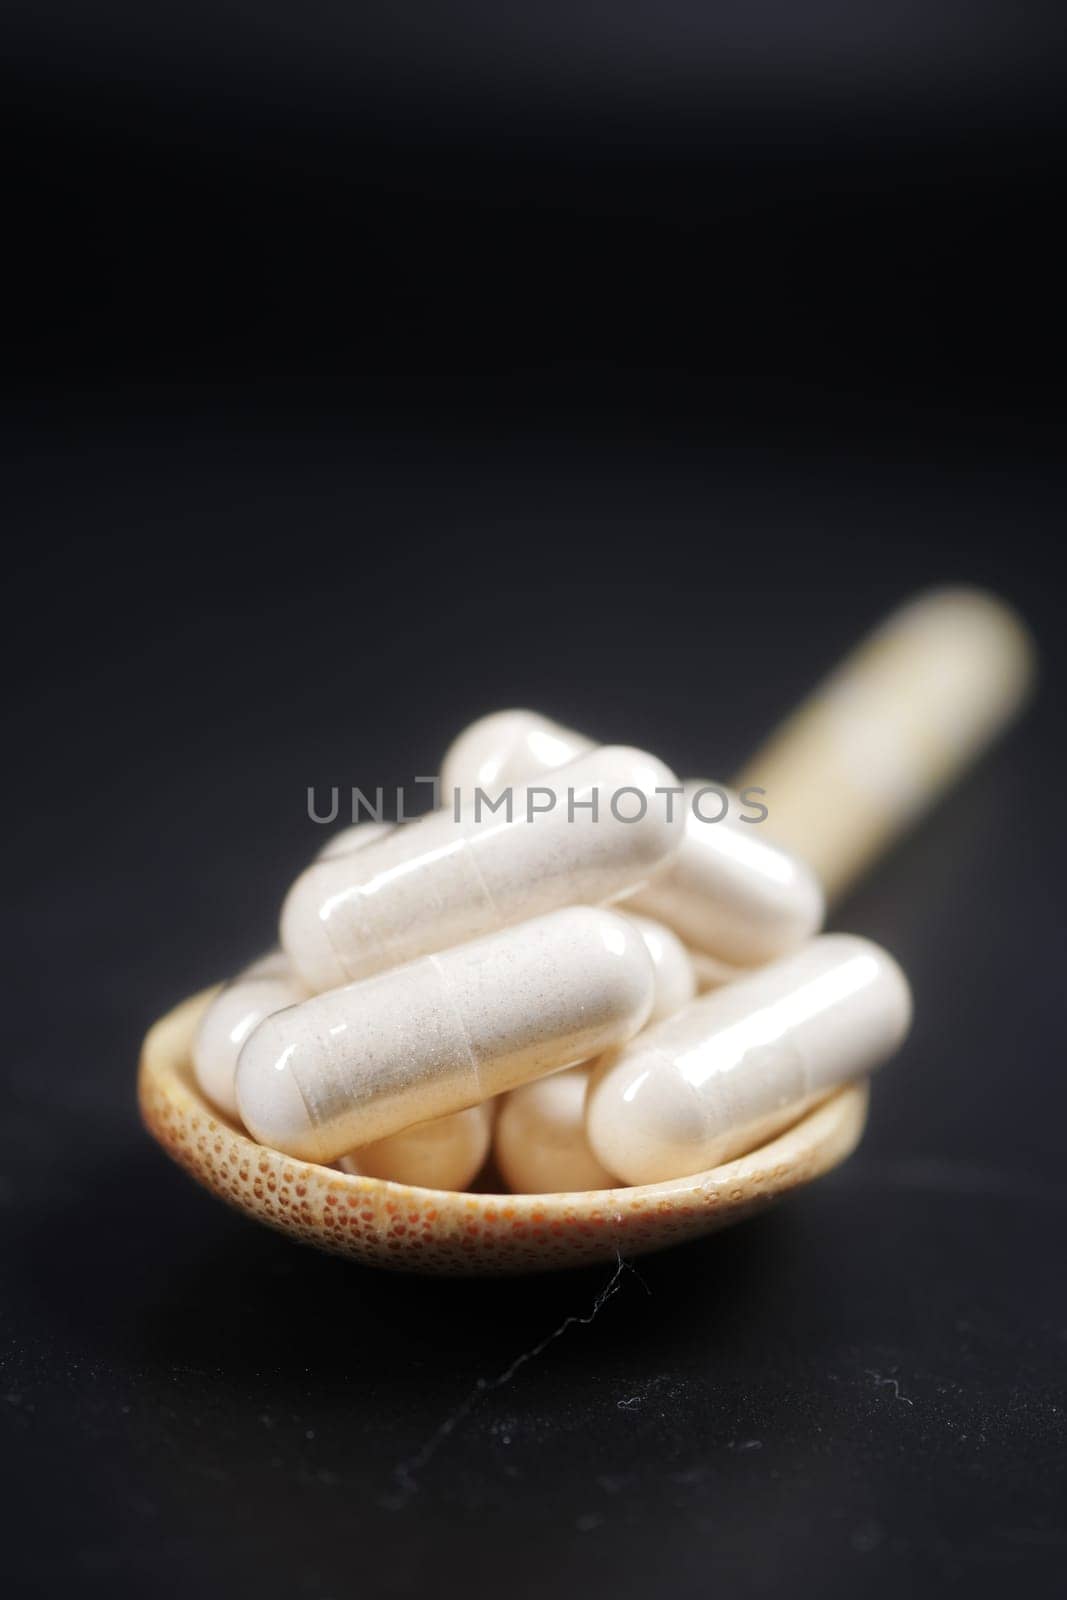 herbal medicine capsules on a spoon on black background .